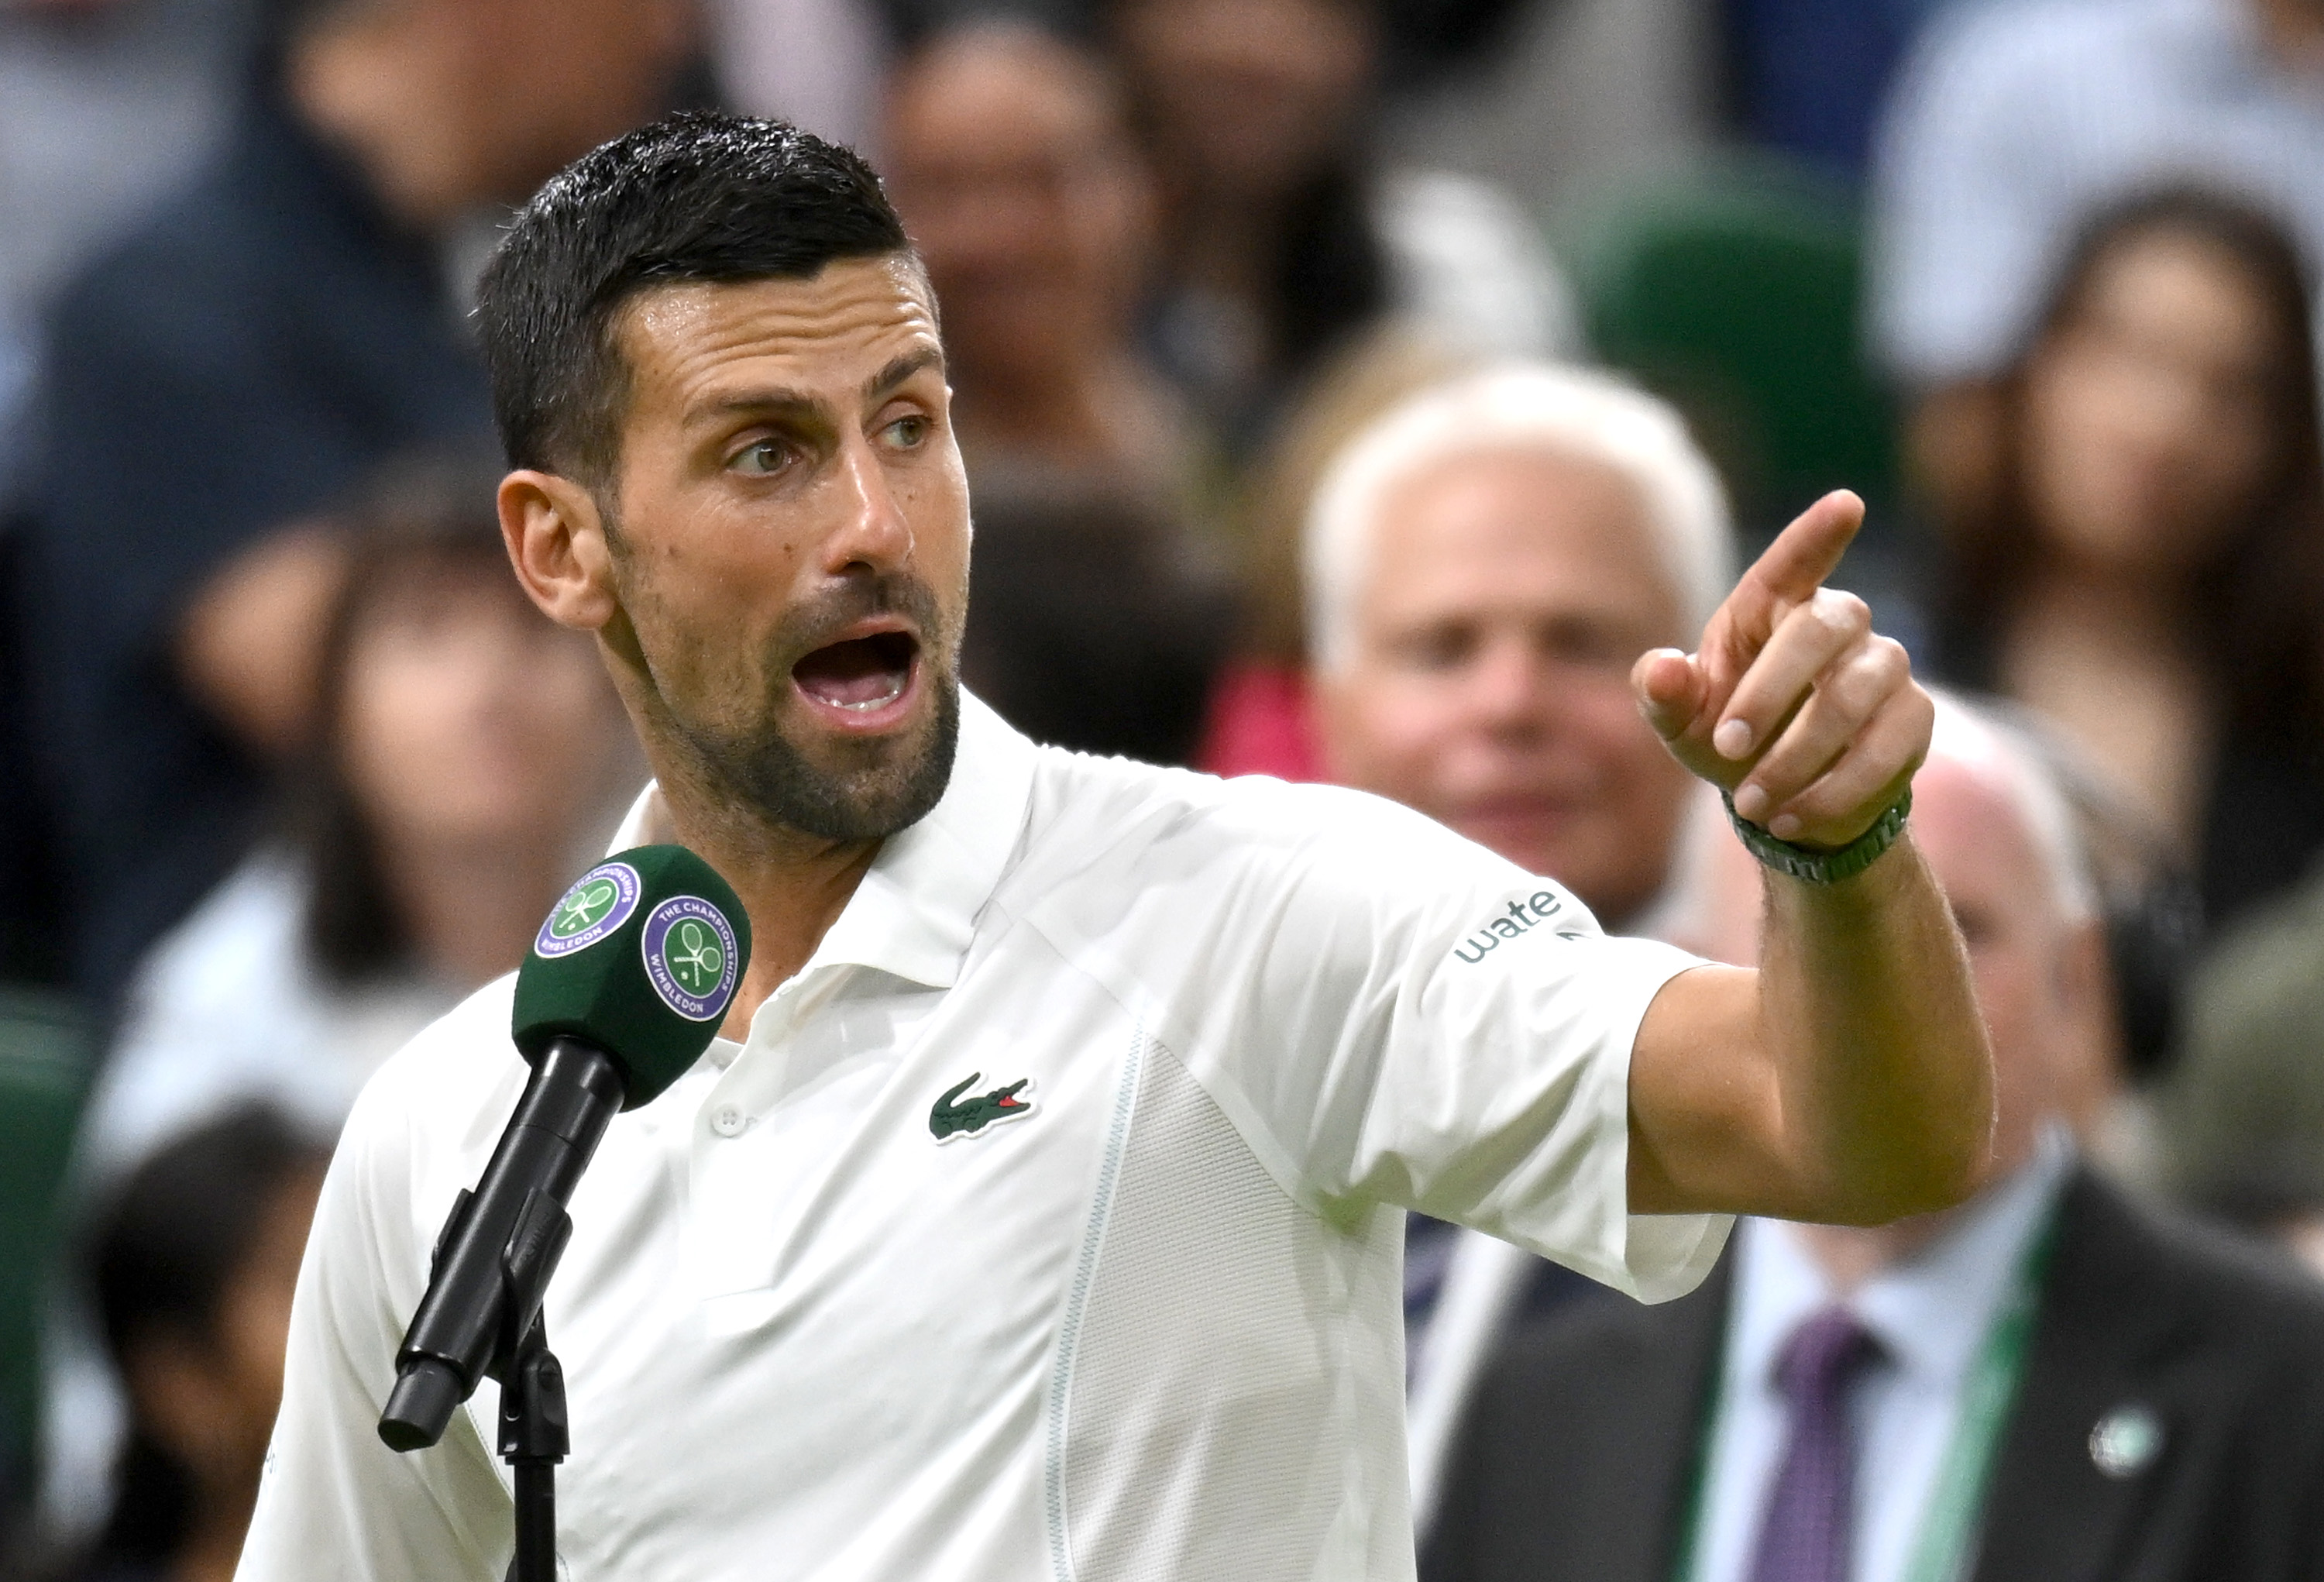 ‘You guys can't touch me': Why Novak Djokovic called out Wimbledon fans after win